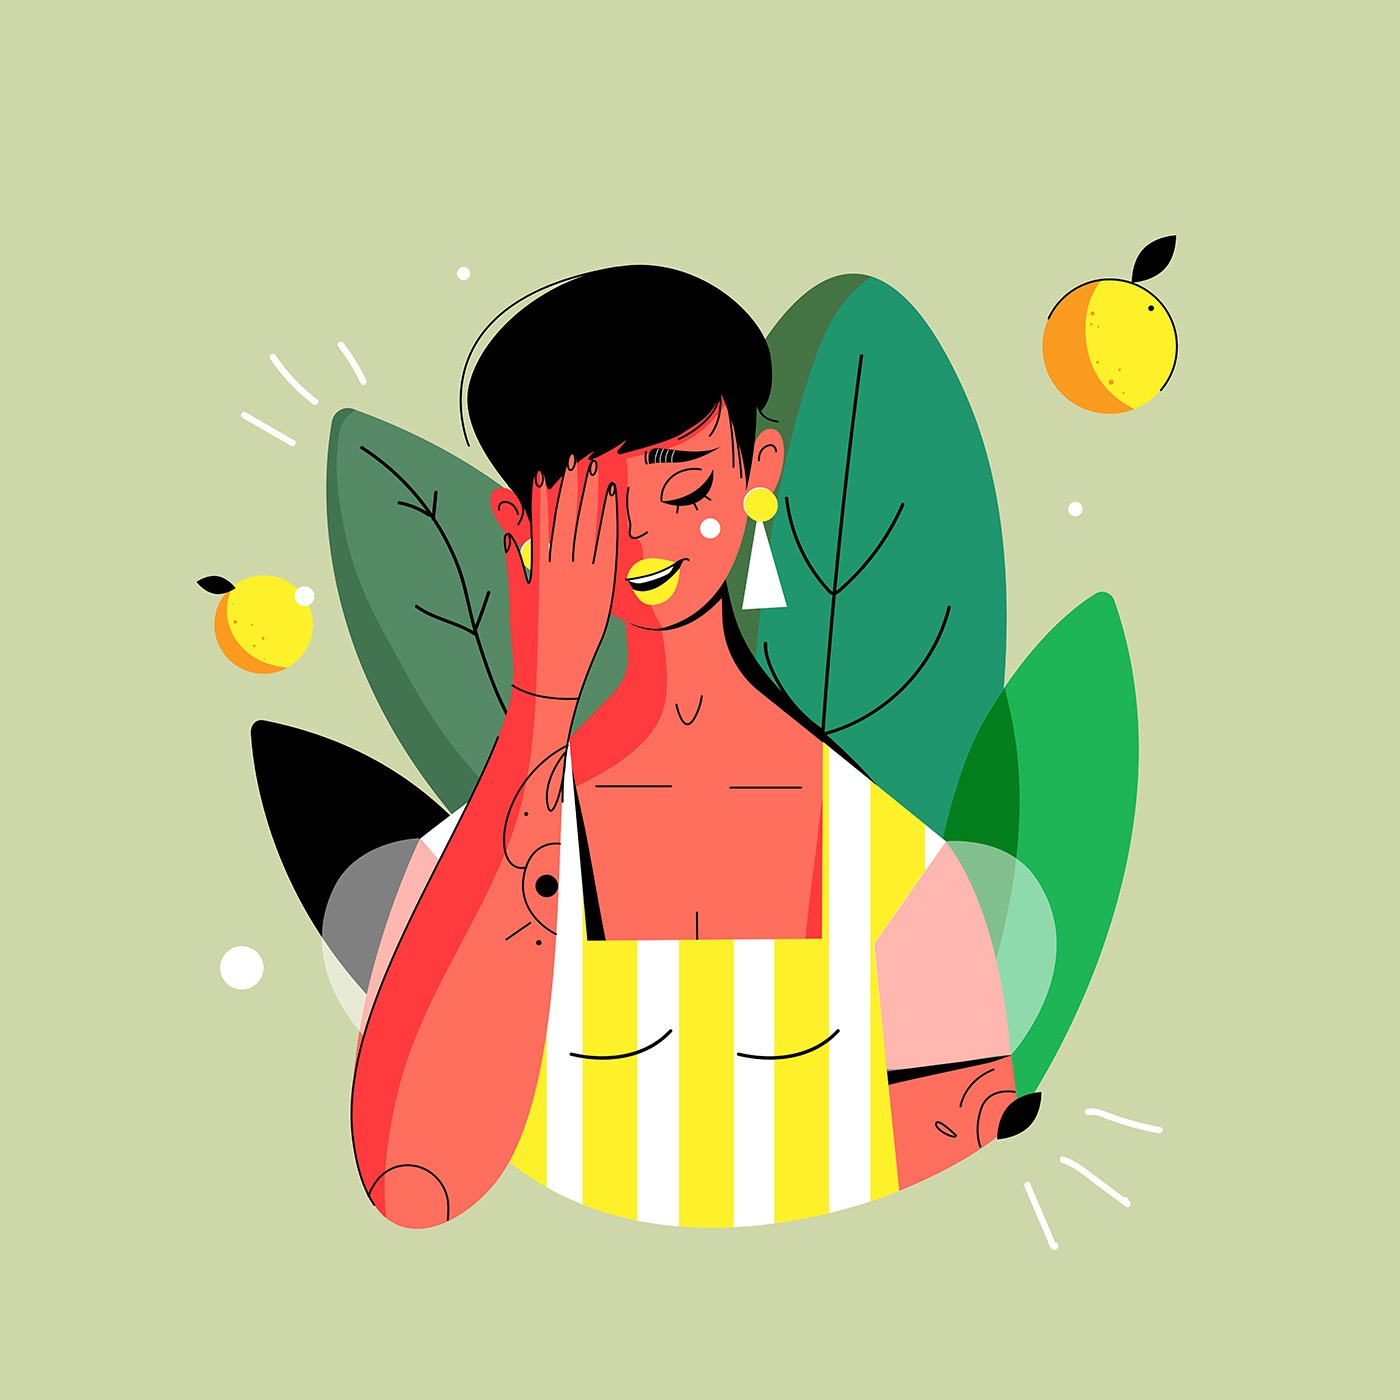 Girl with red skin. Illustration of a girl in a flat style with oranges